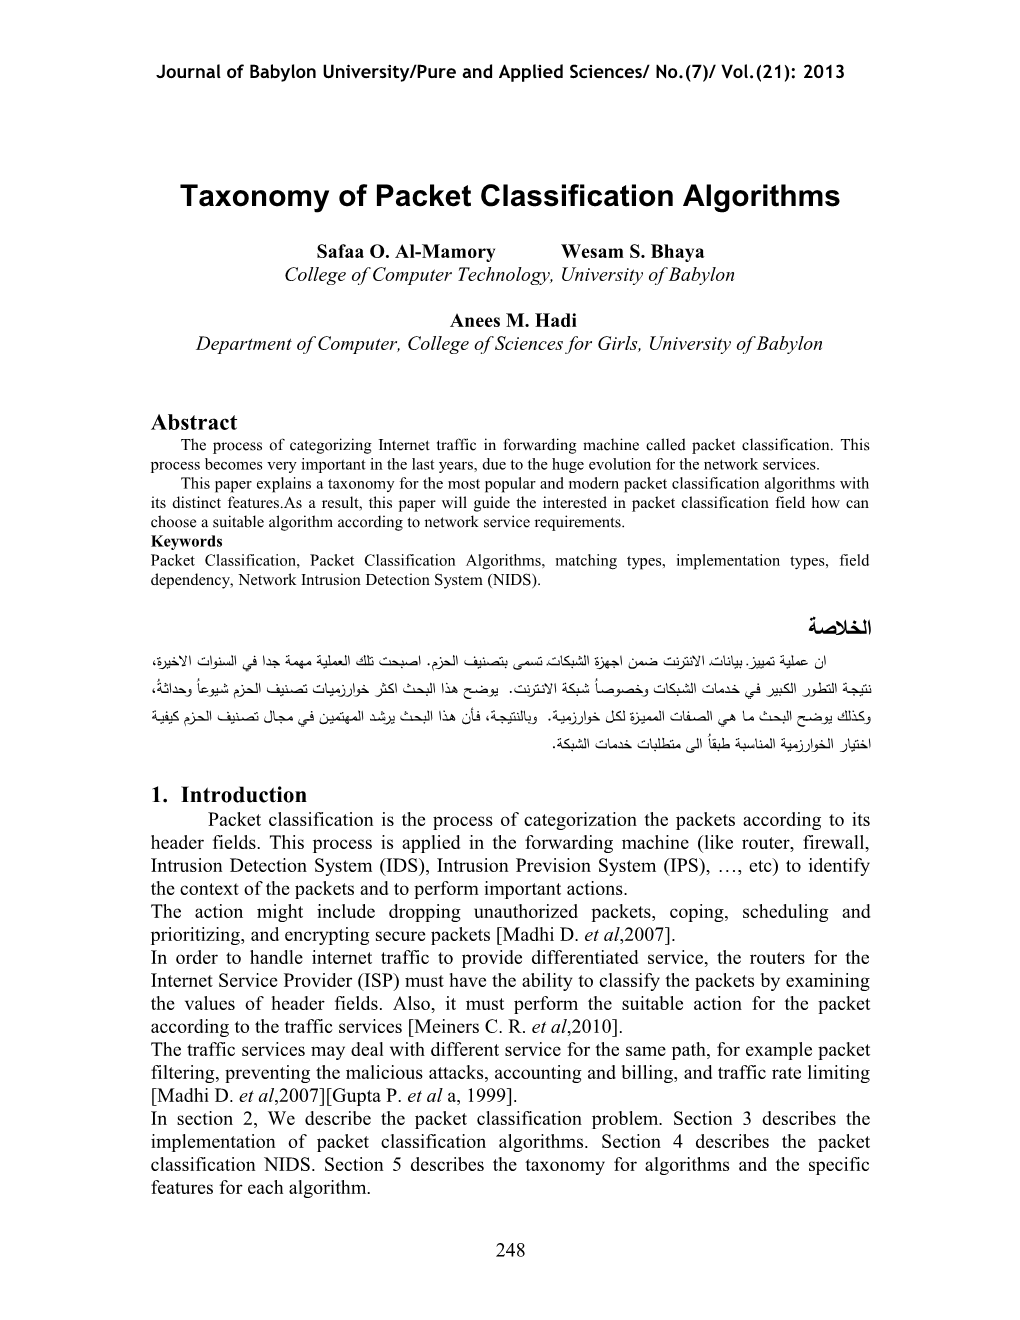 Taxonomy of Packet Classification Algorithms